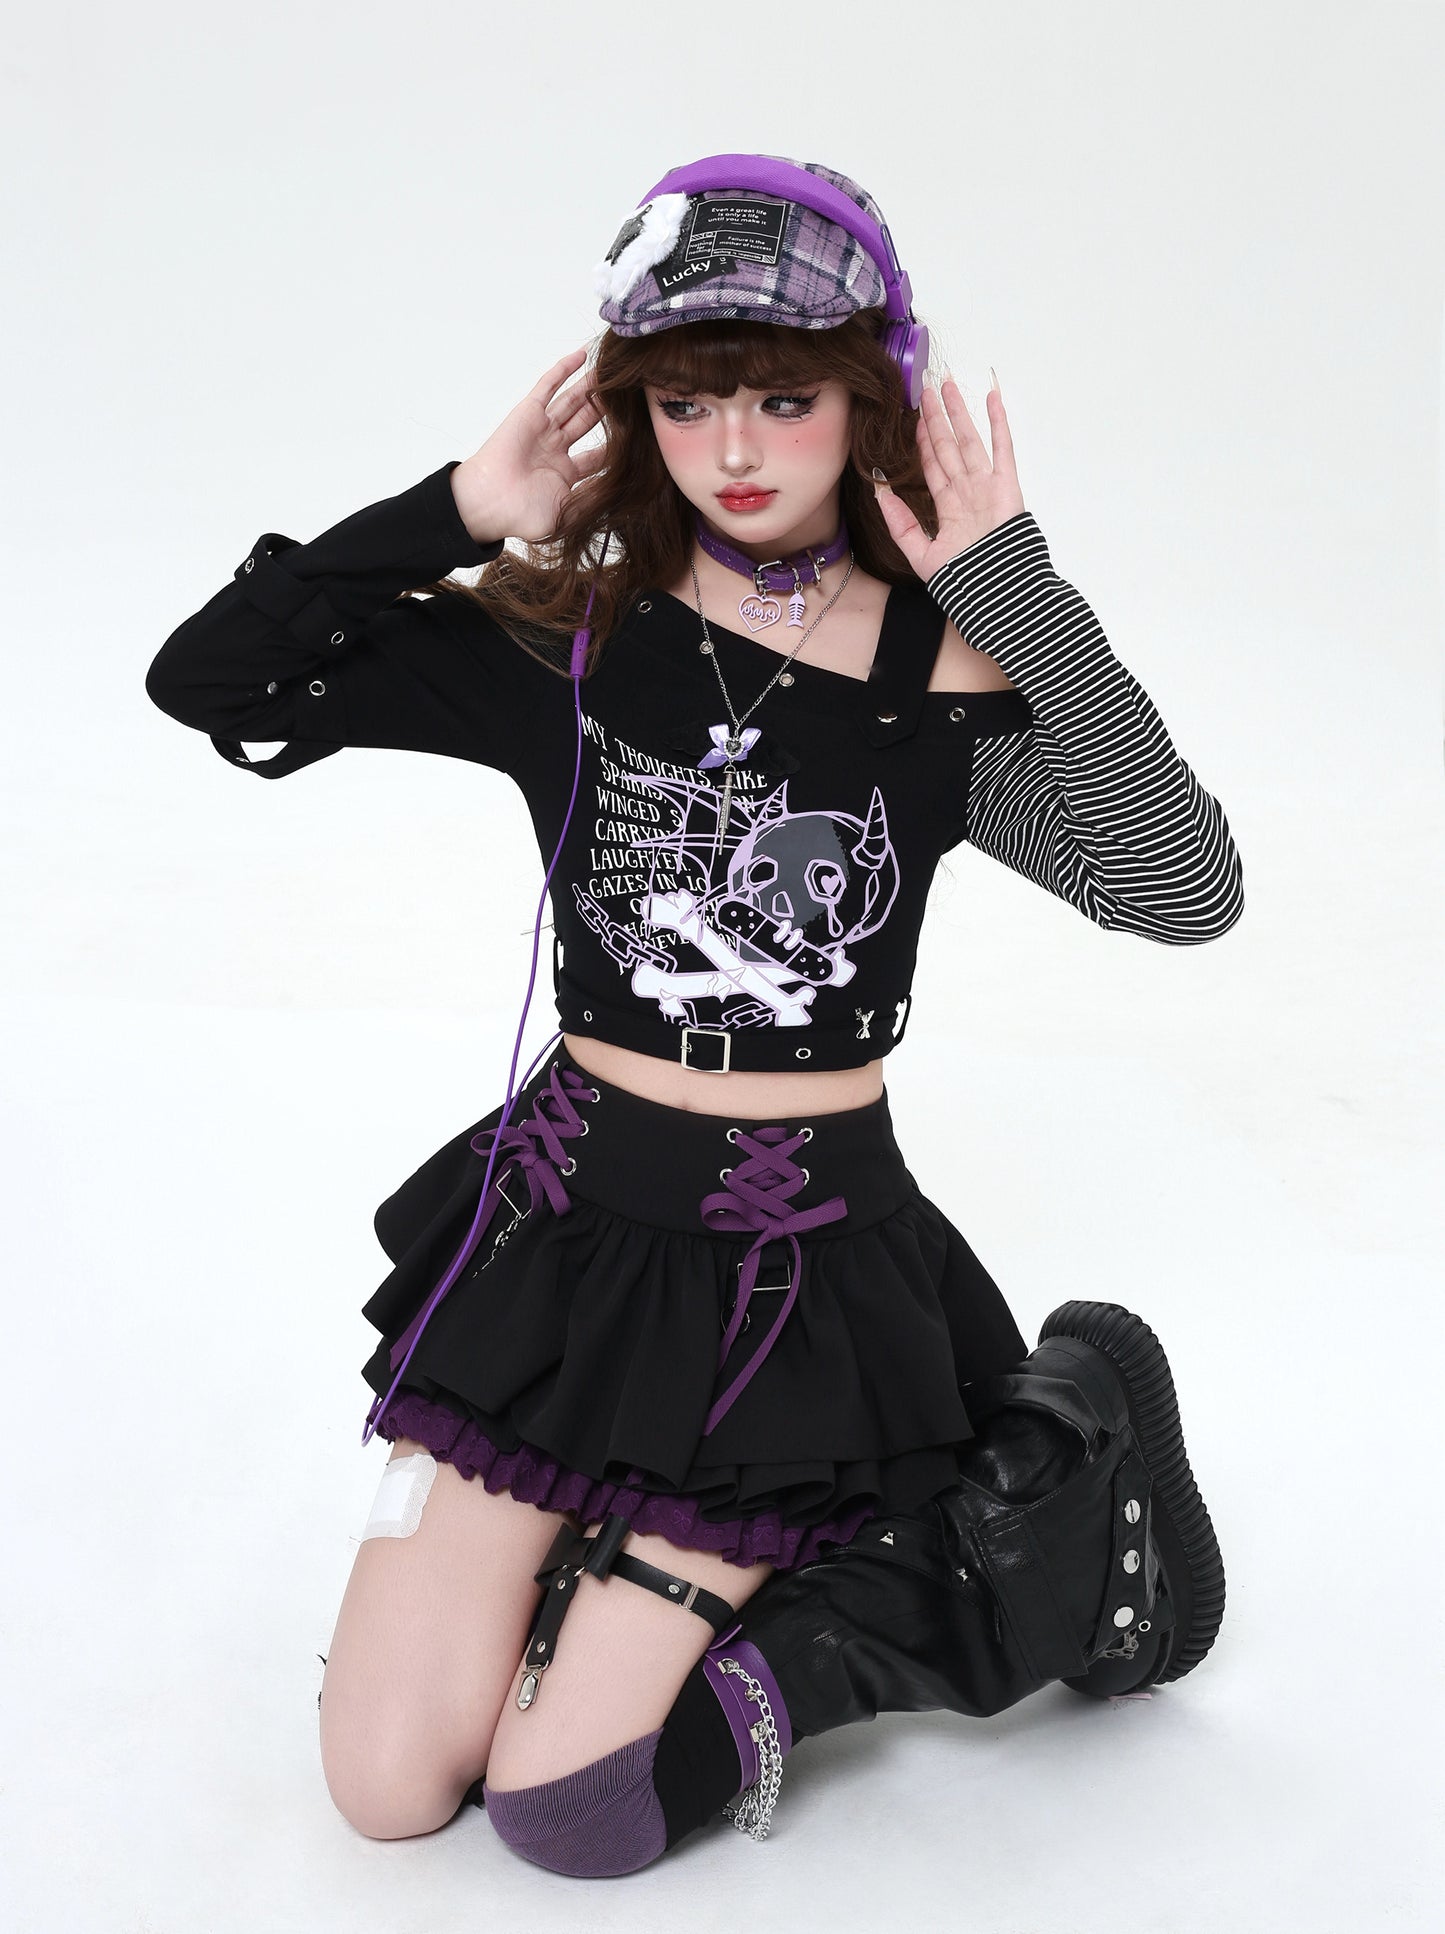 Lace-Up Design Flared Skirt